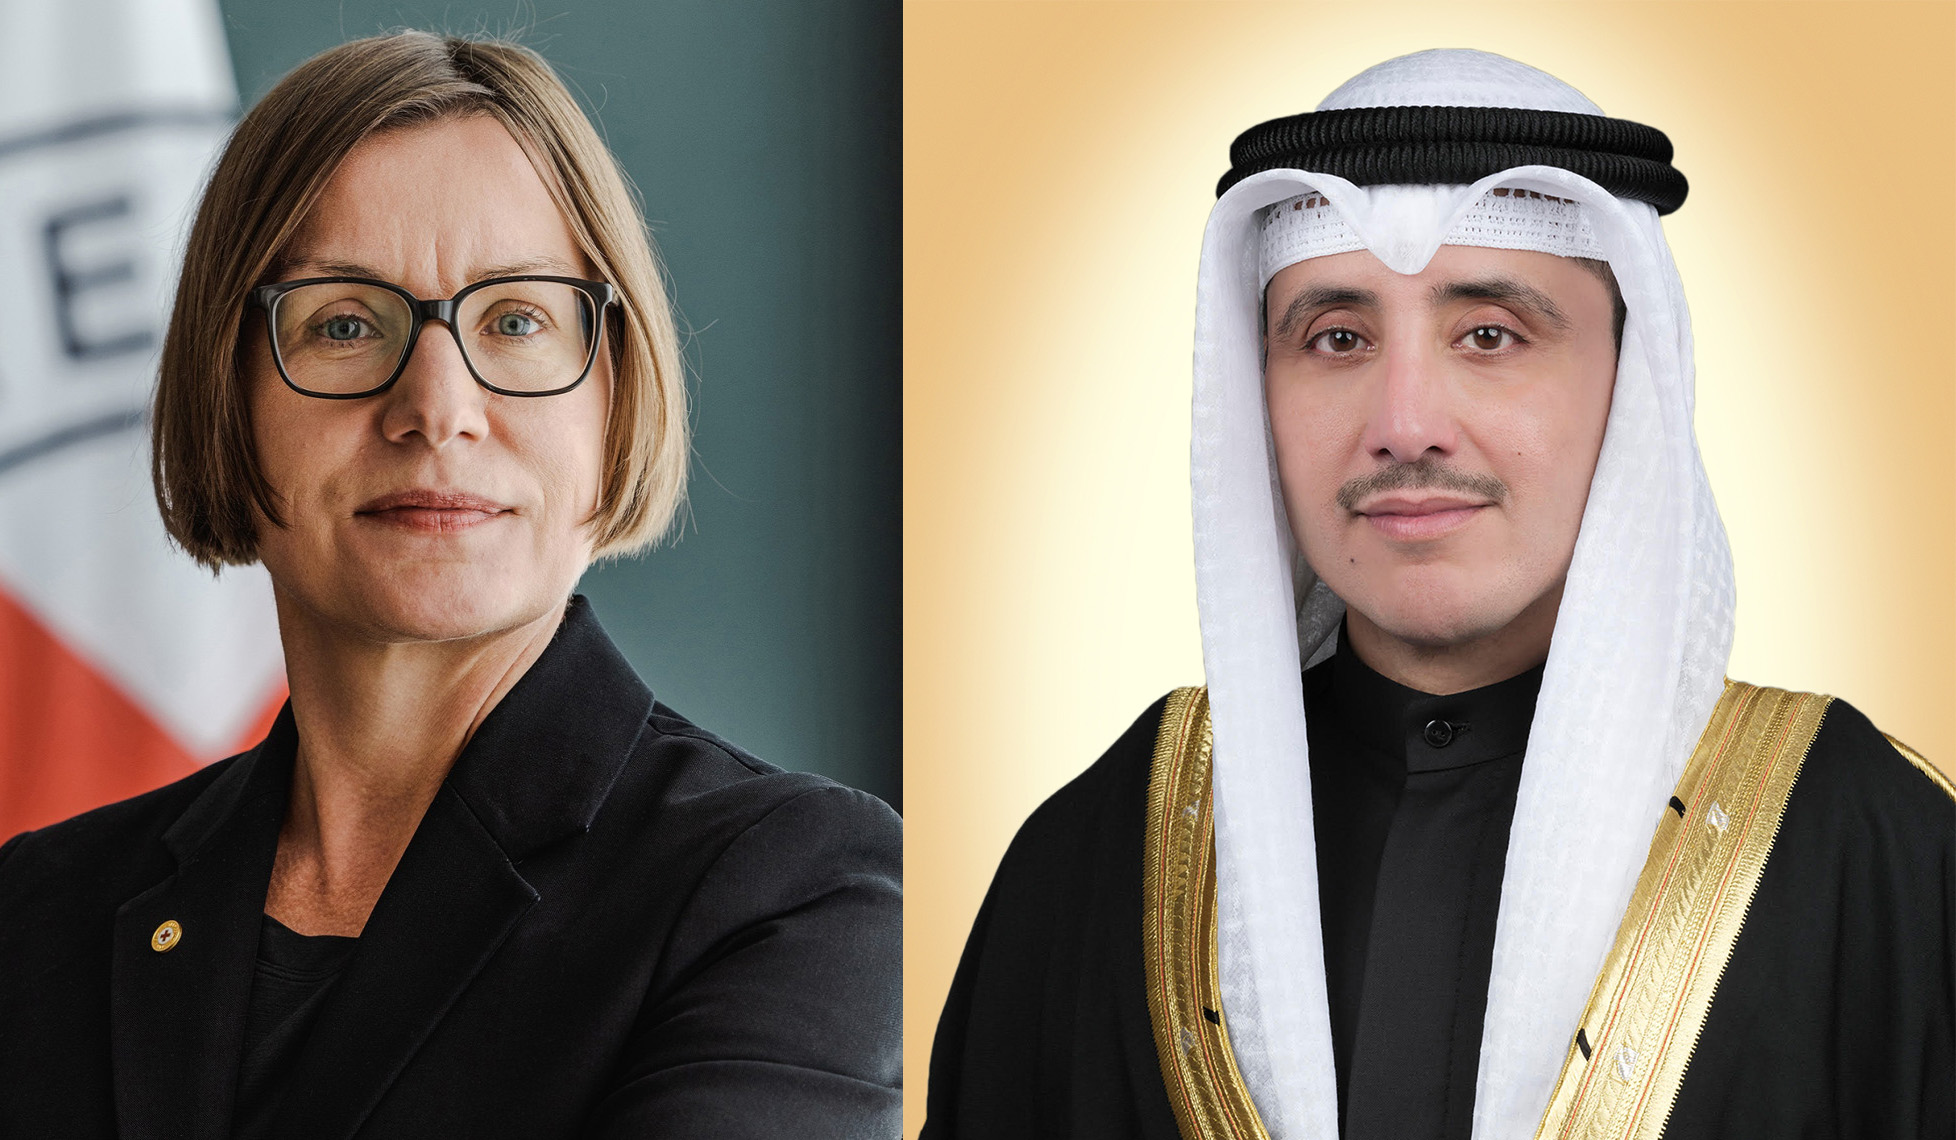 Foreign Minister Sheikh Dr. Ahmad Nasser Al-Mohammad Al-Sabah and newly-elected President of the (ICRC), Mirjana Spoljaric Egger